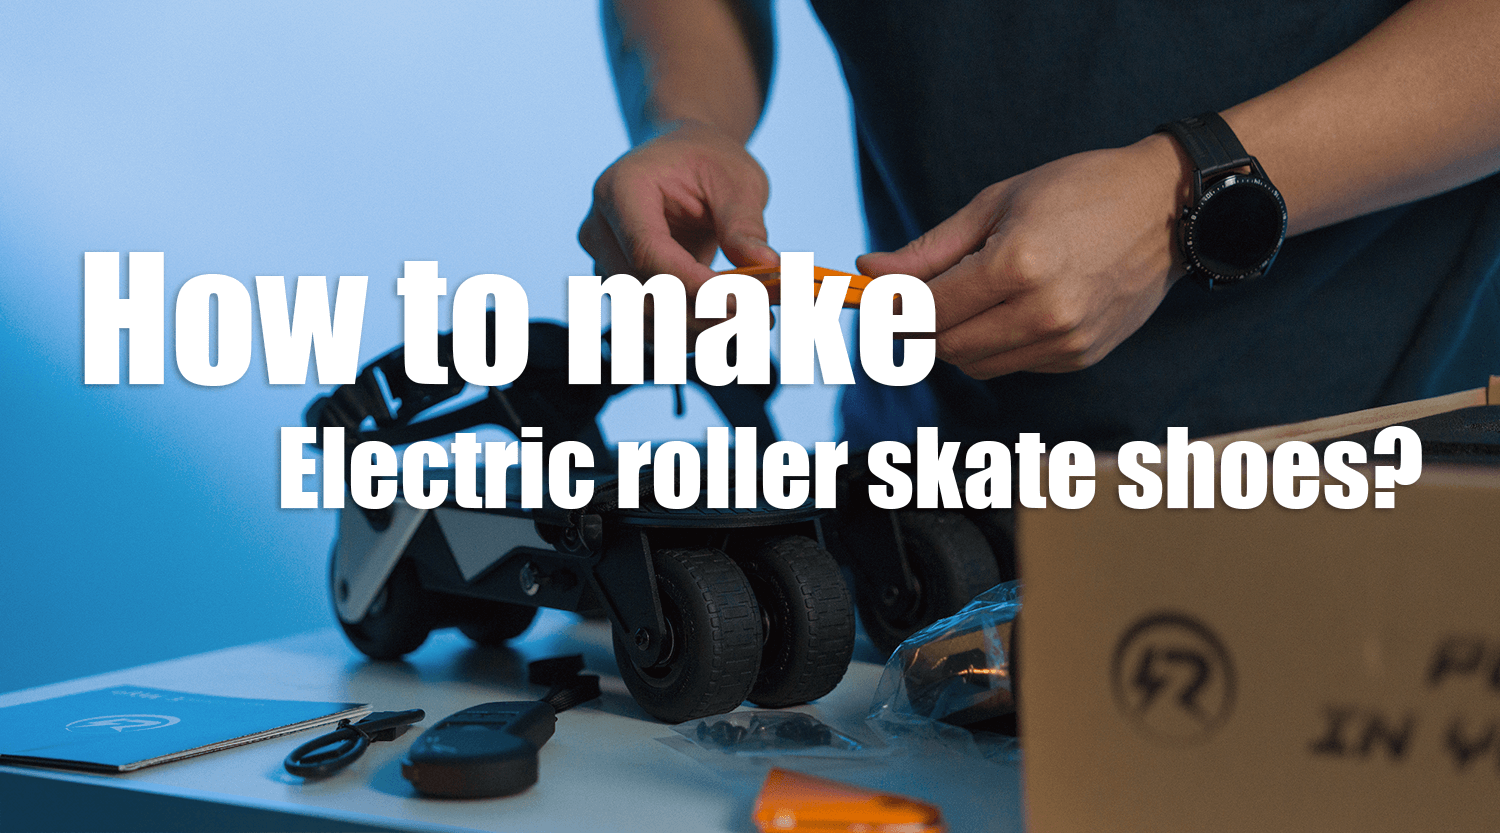 How to make Electric roller skate shoes